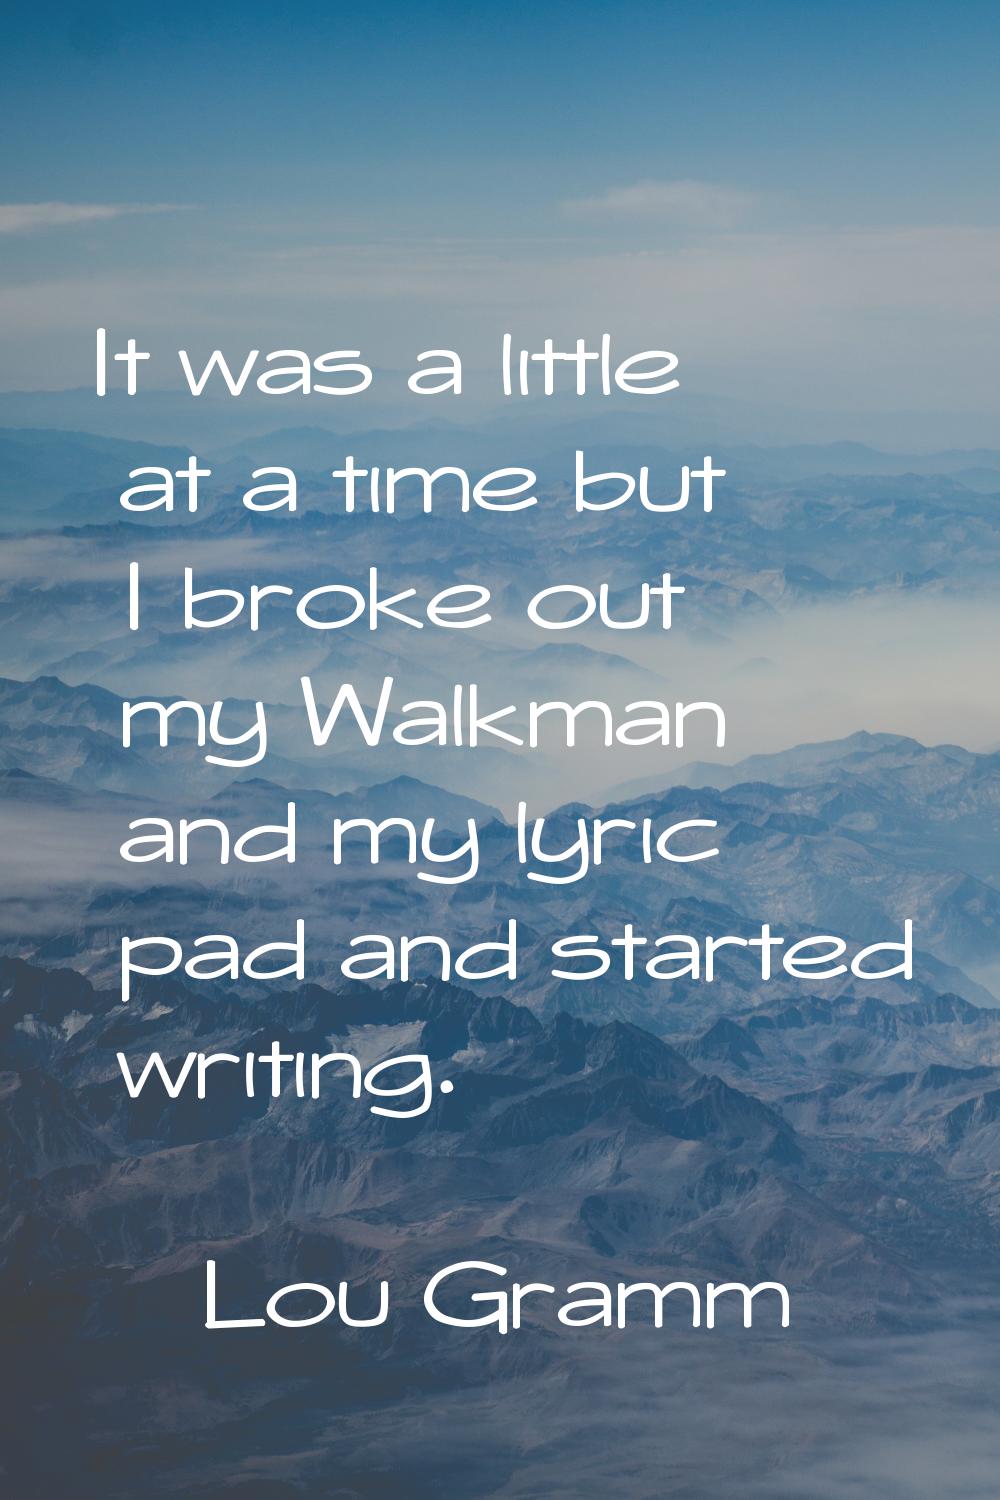 It was a little at a time but I broke out my Walkman and my lyric pad and started writing.